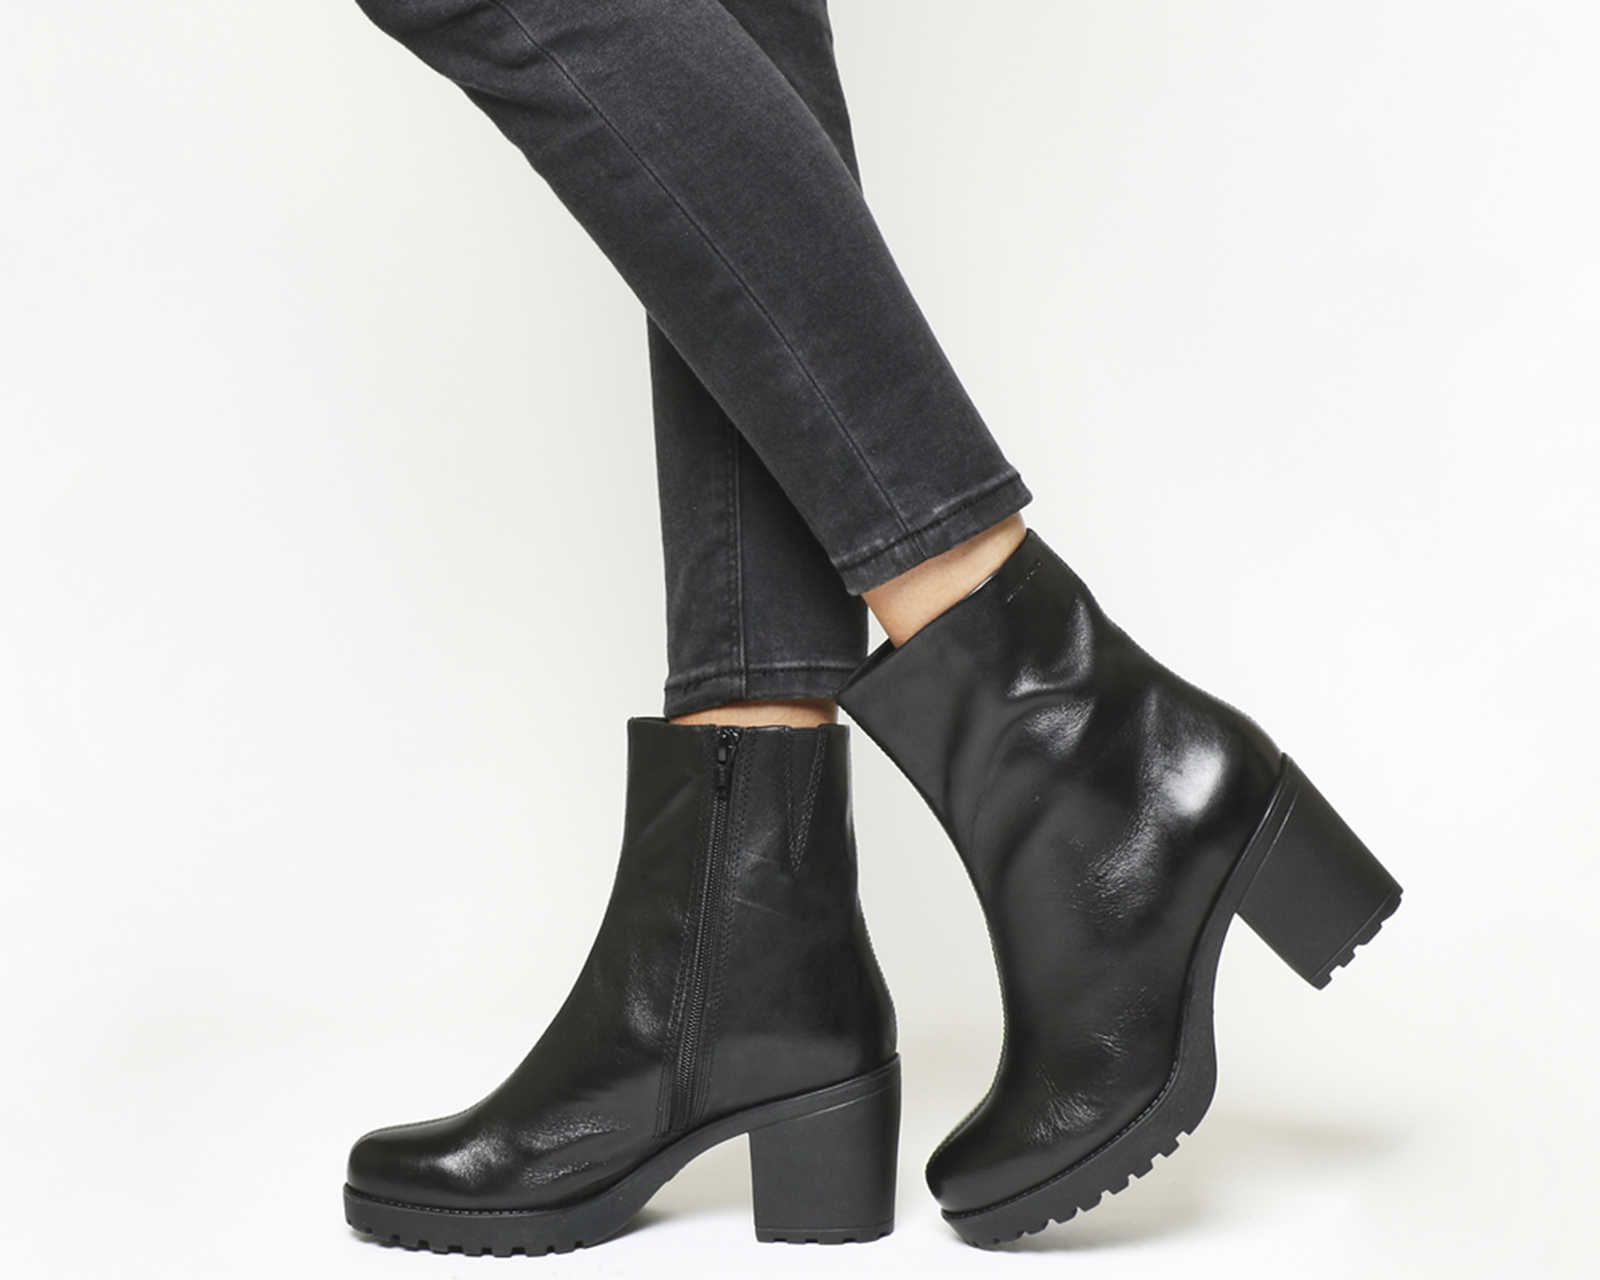 Cut Boot Black Leather - Ankle Boots